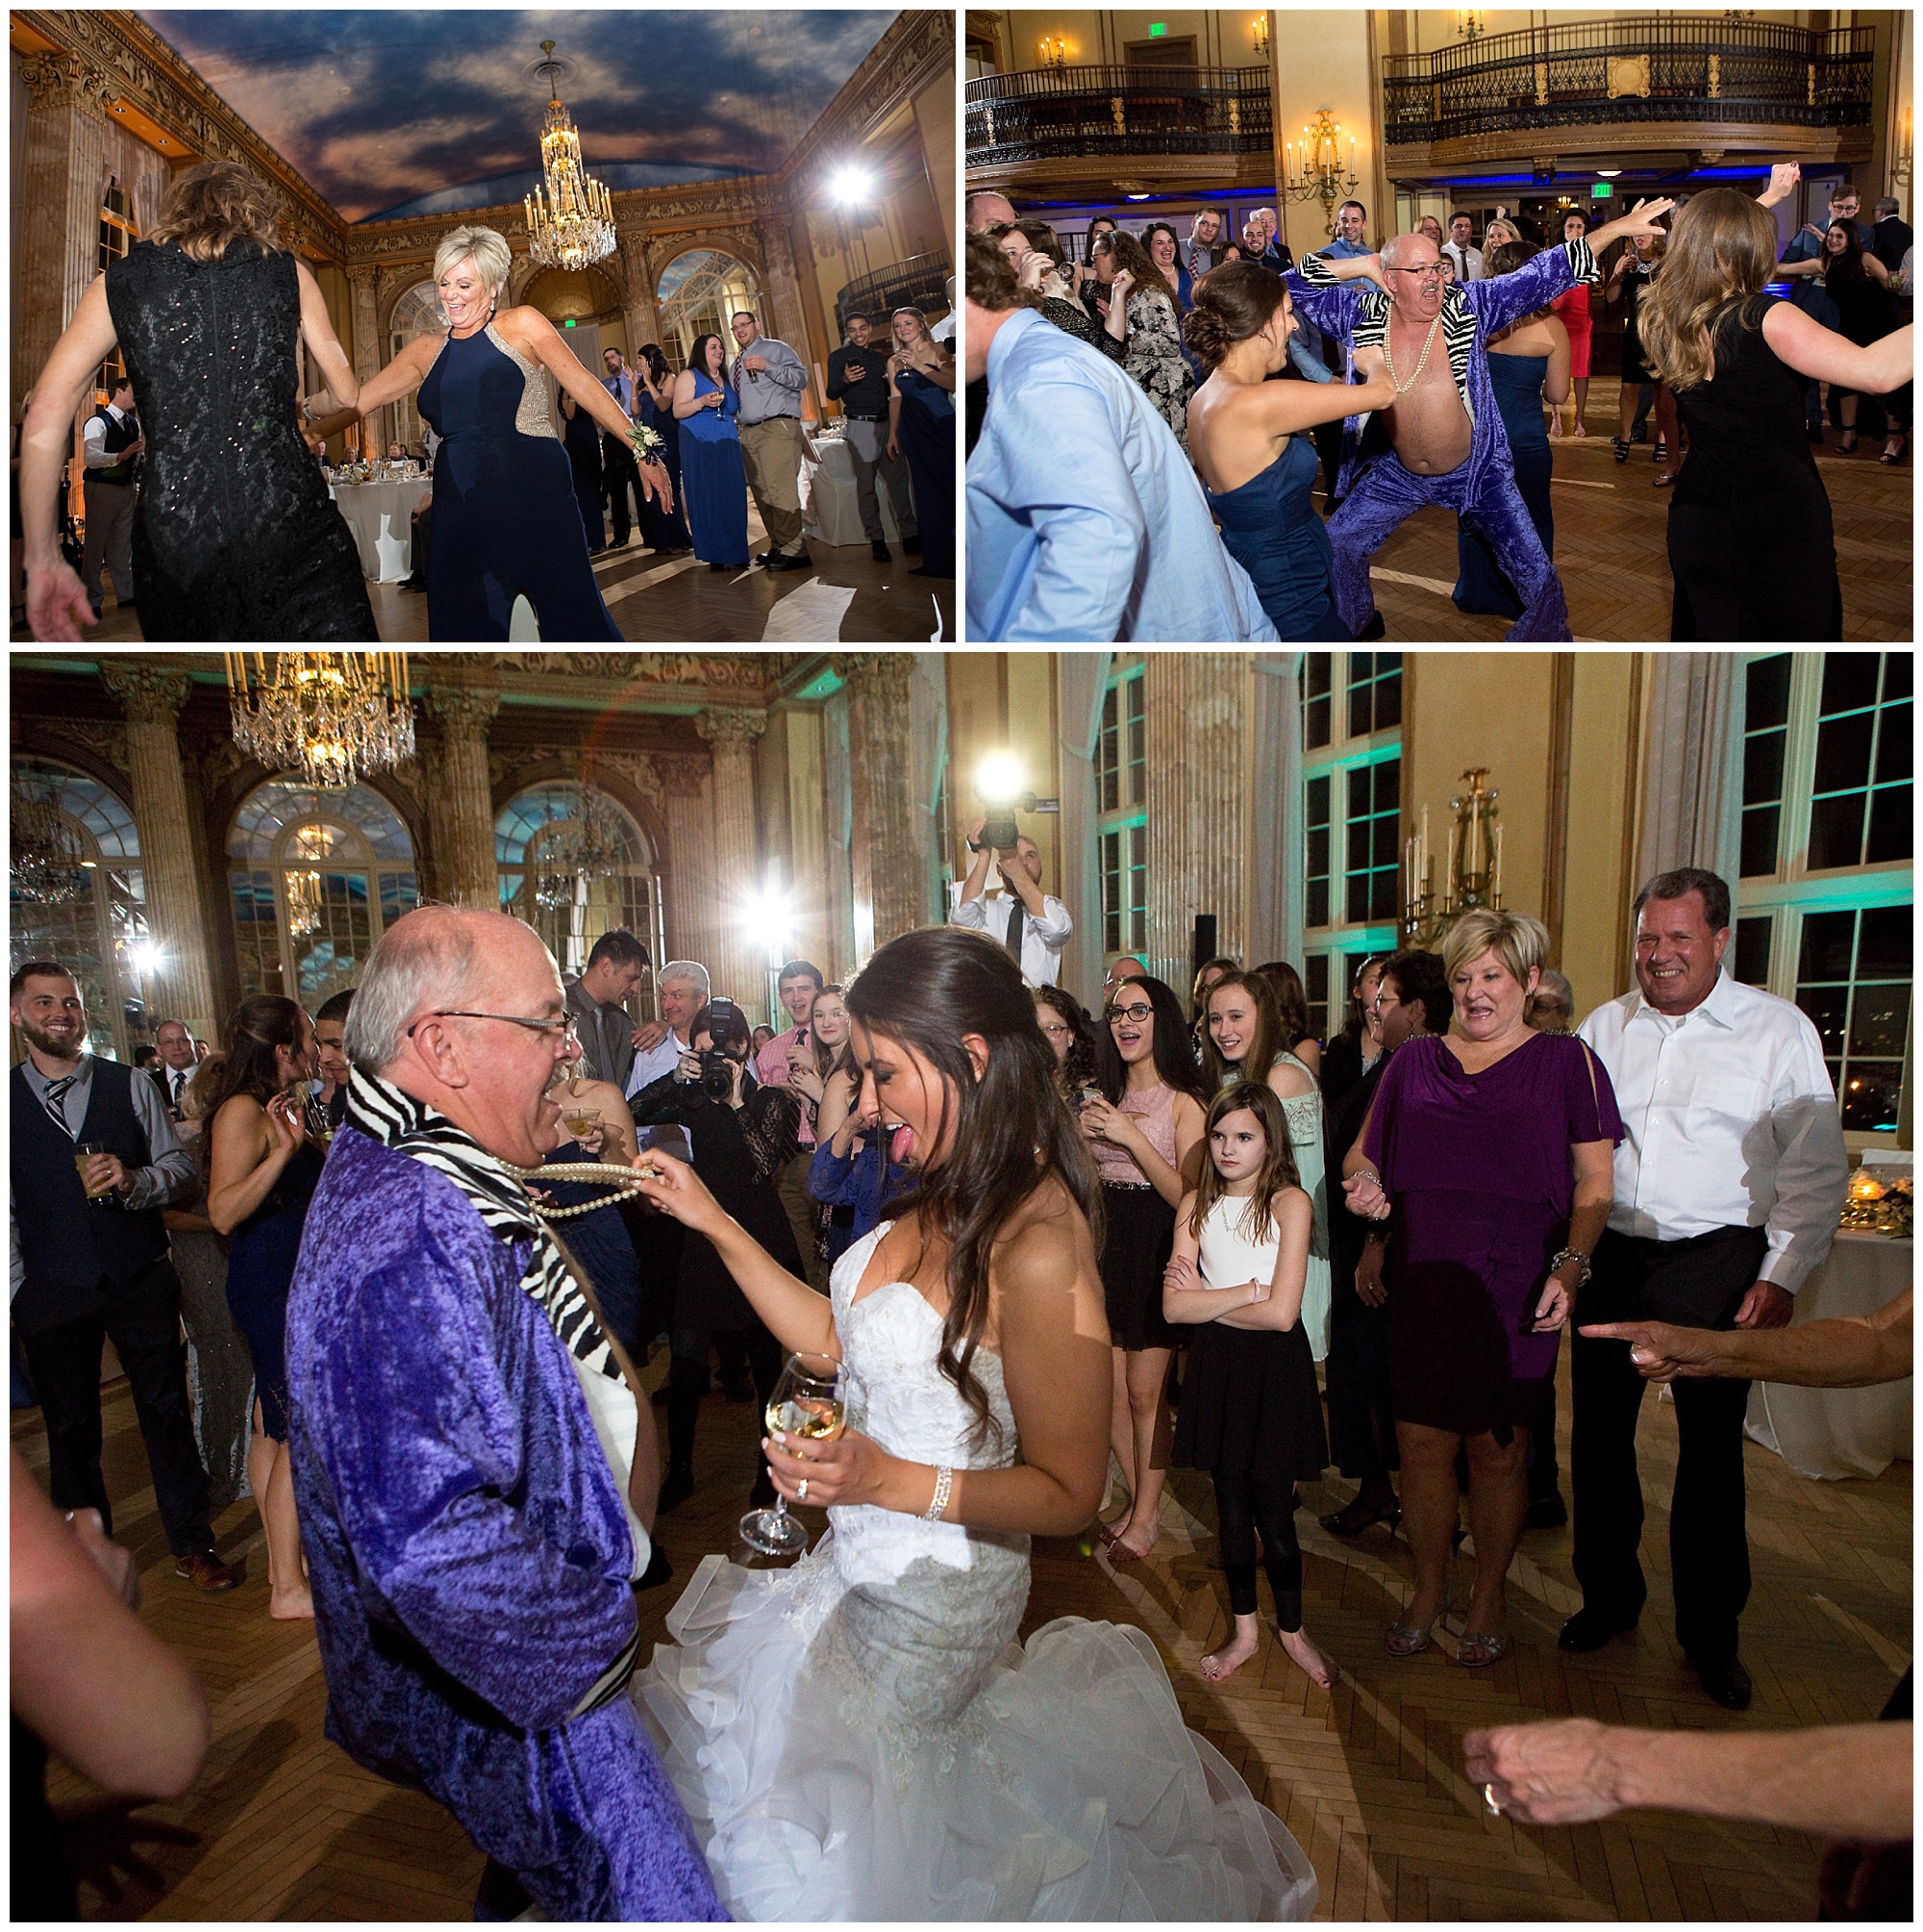 Photo of a bride dancing with a relative who is dressed in a purple velvet suit wearing no shirt, just the pants adn an open buttoned jacket.